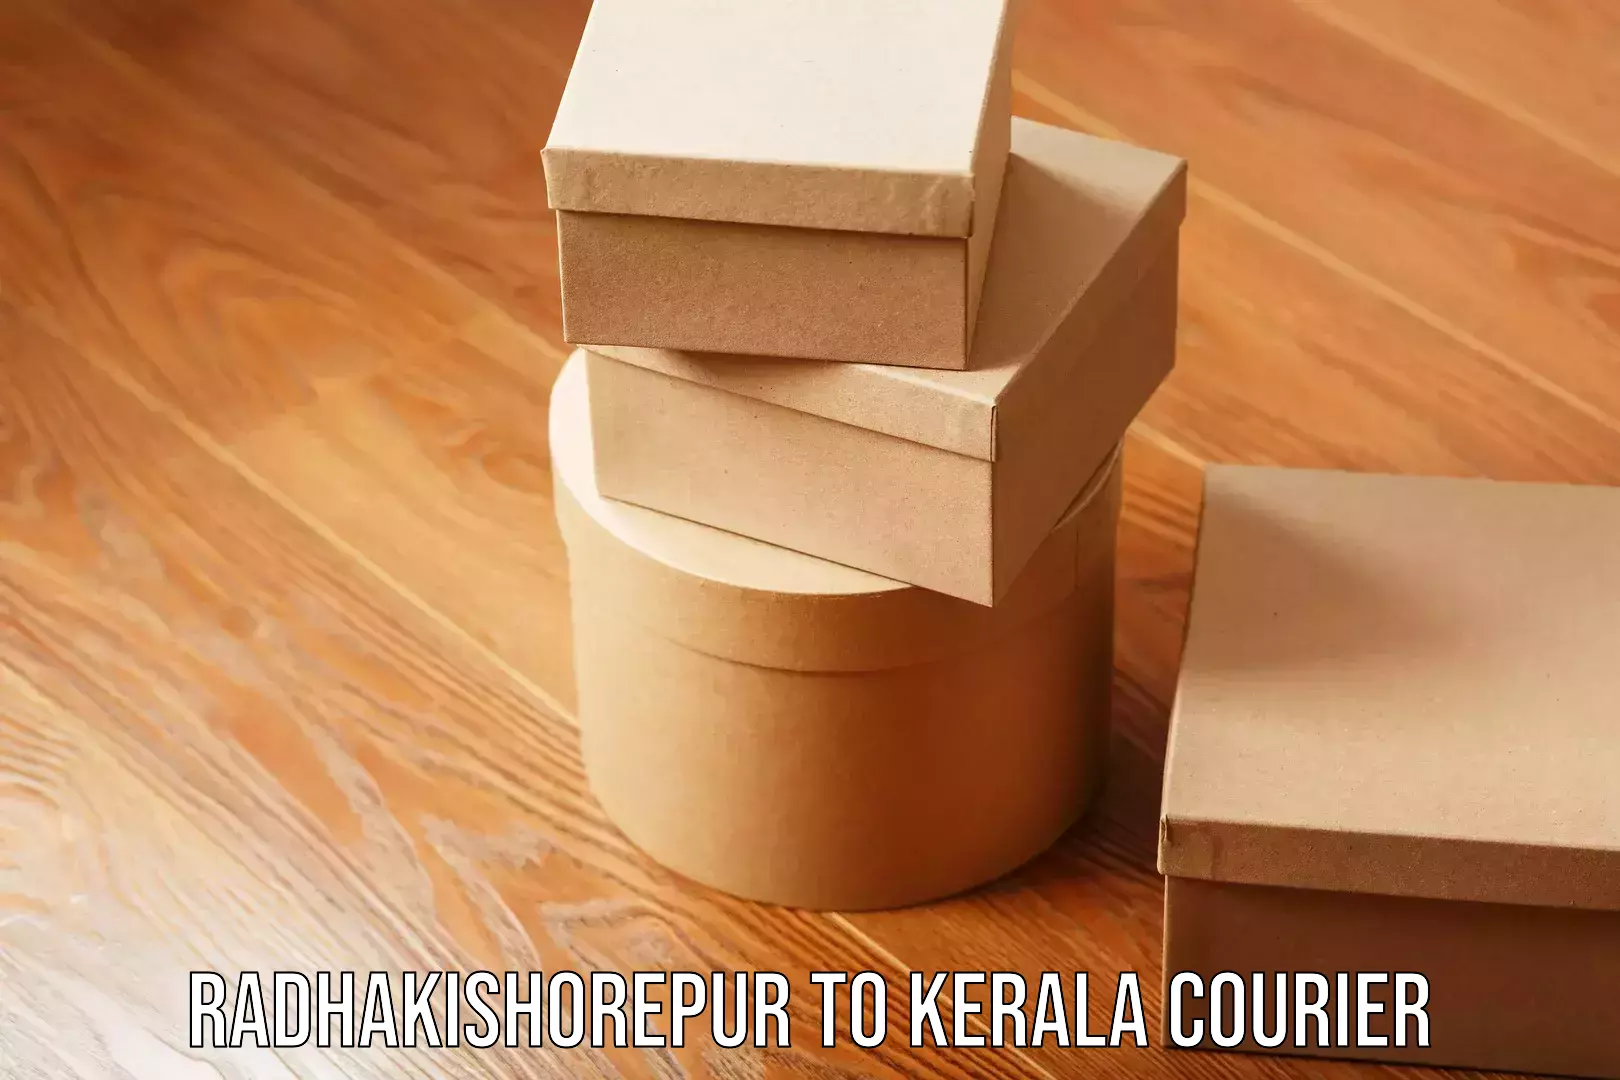 On-demand delivery in Radhakishorepur to Kerala